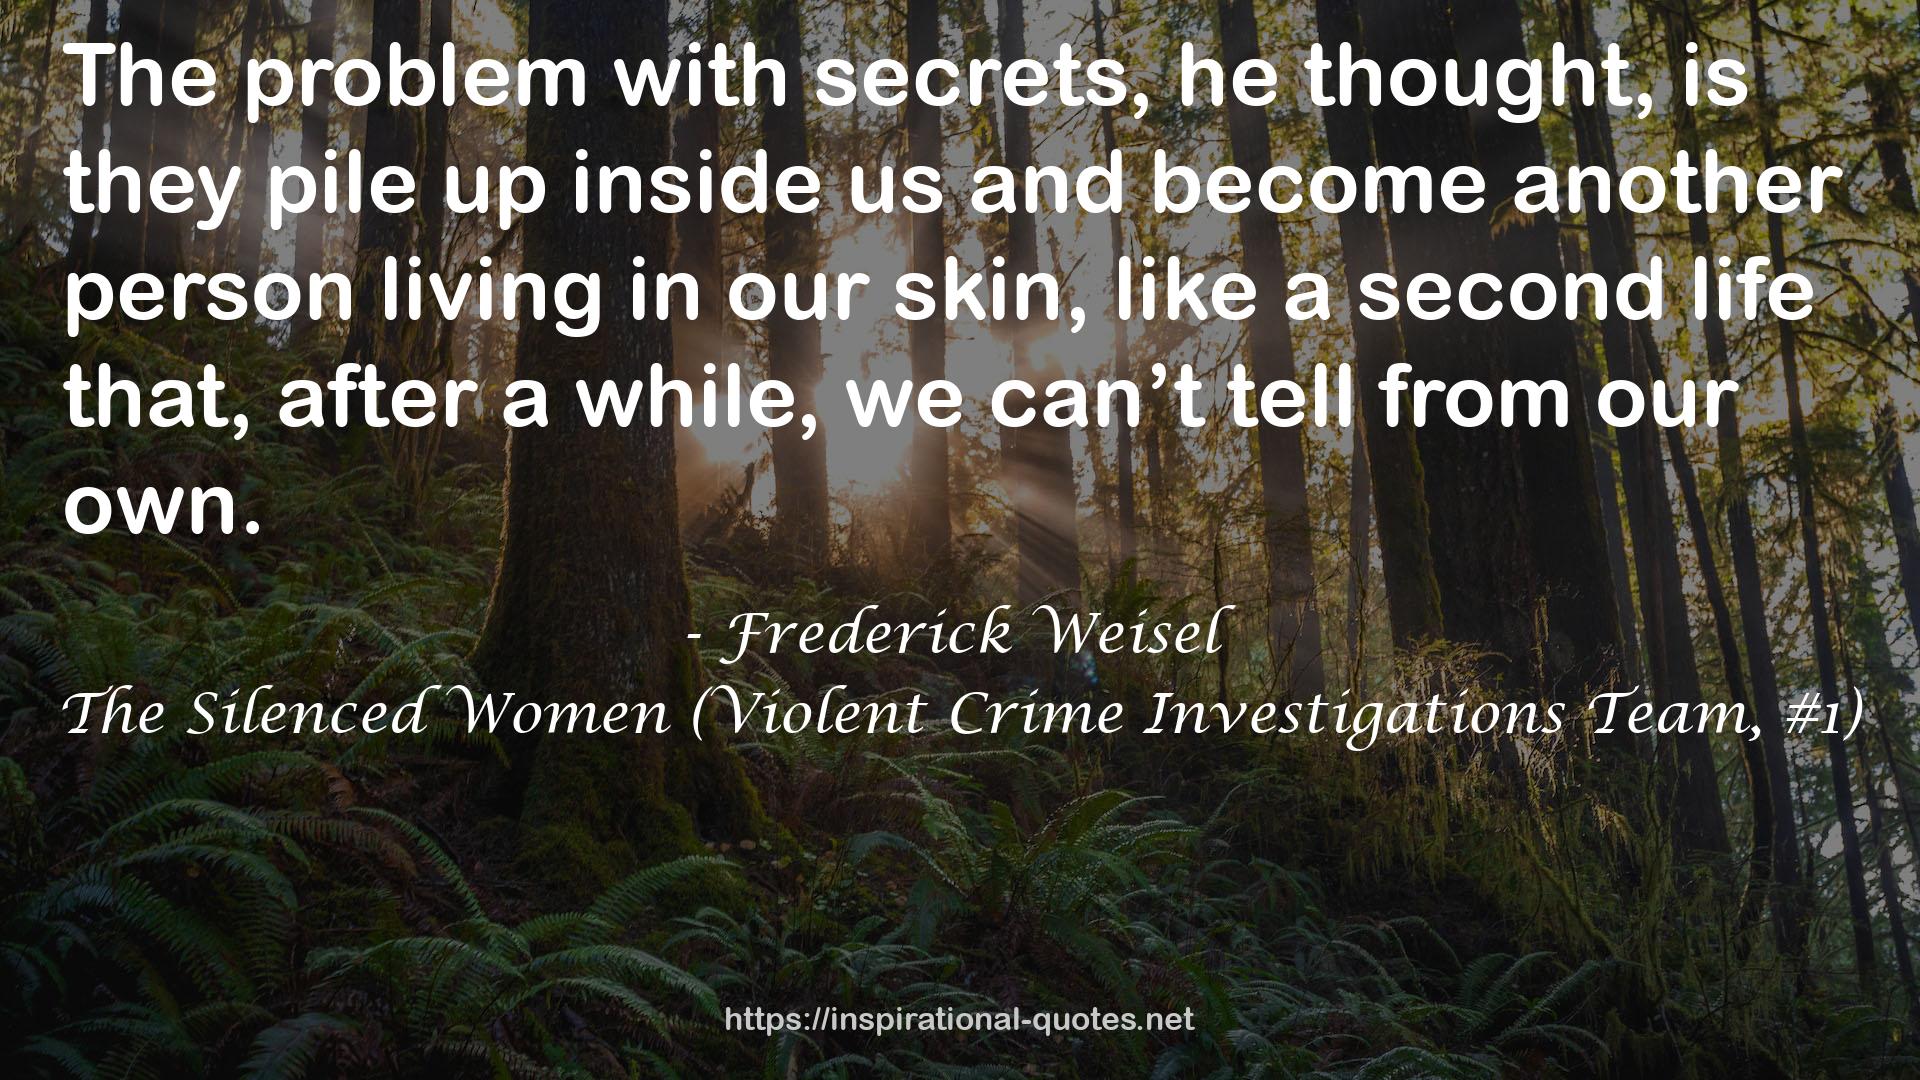 The Silenced Women (Violent Crime Investigations Team, #1) QUOTES